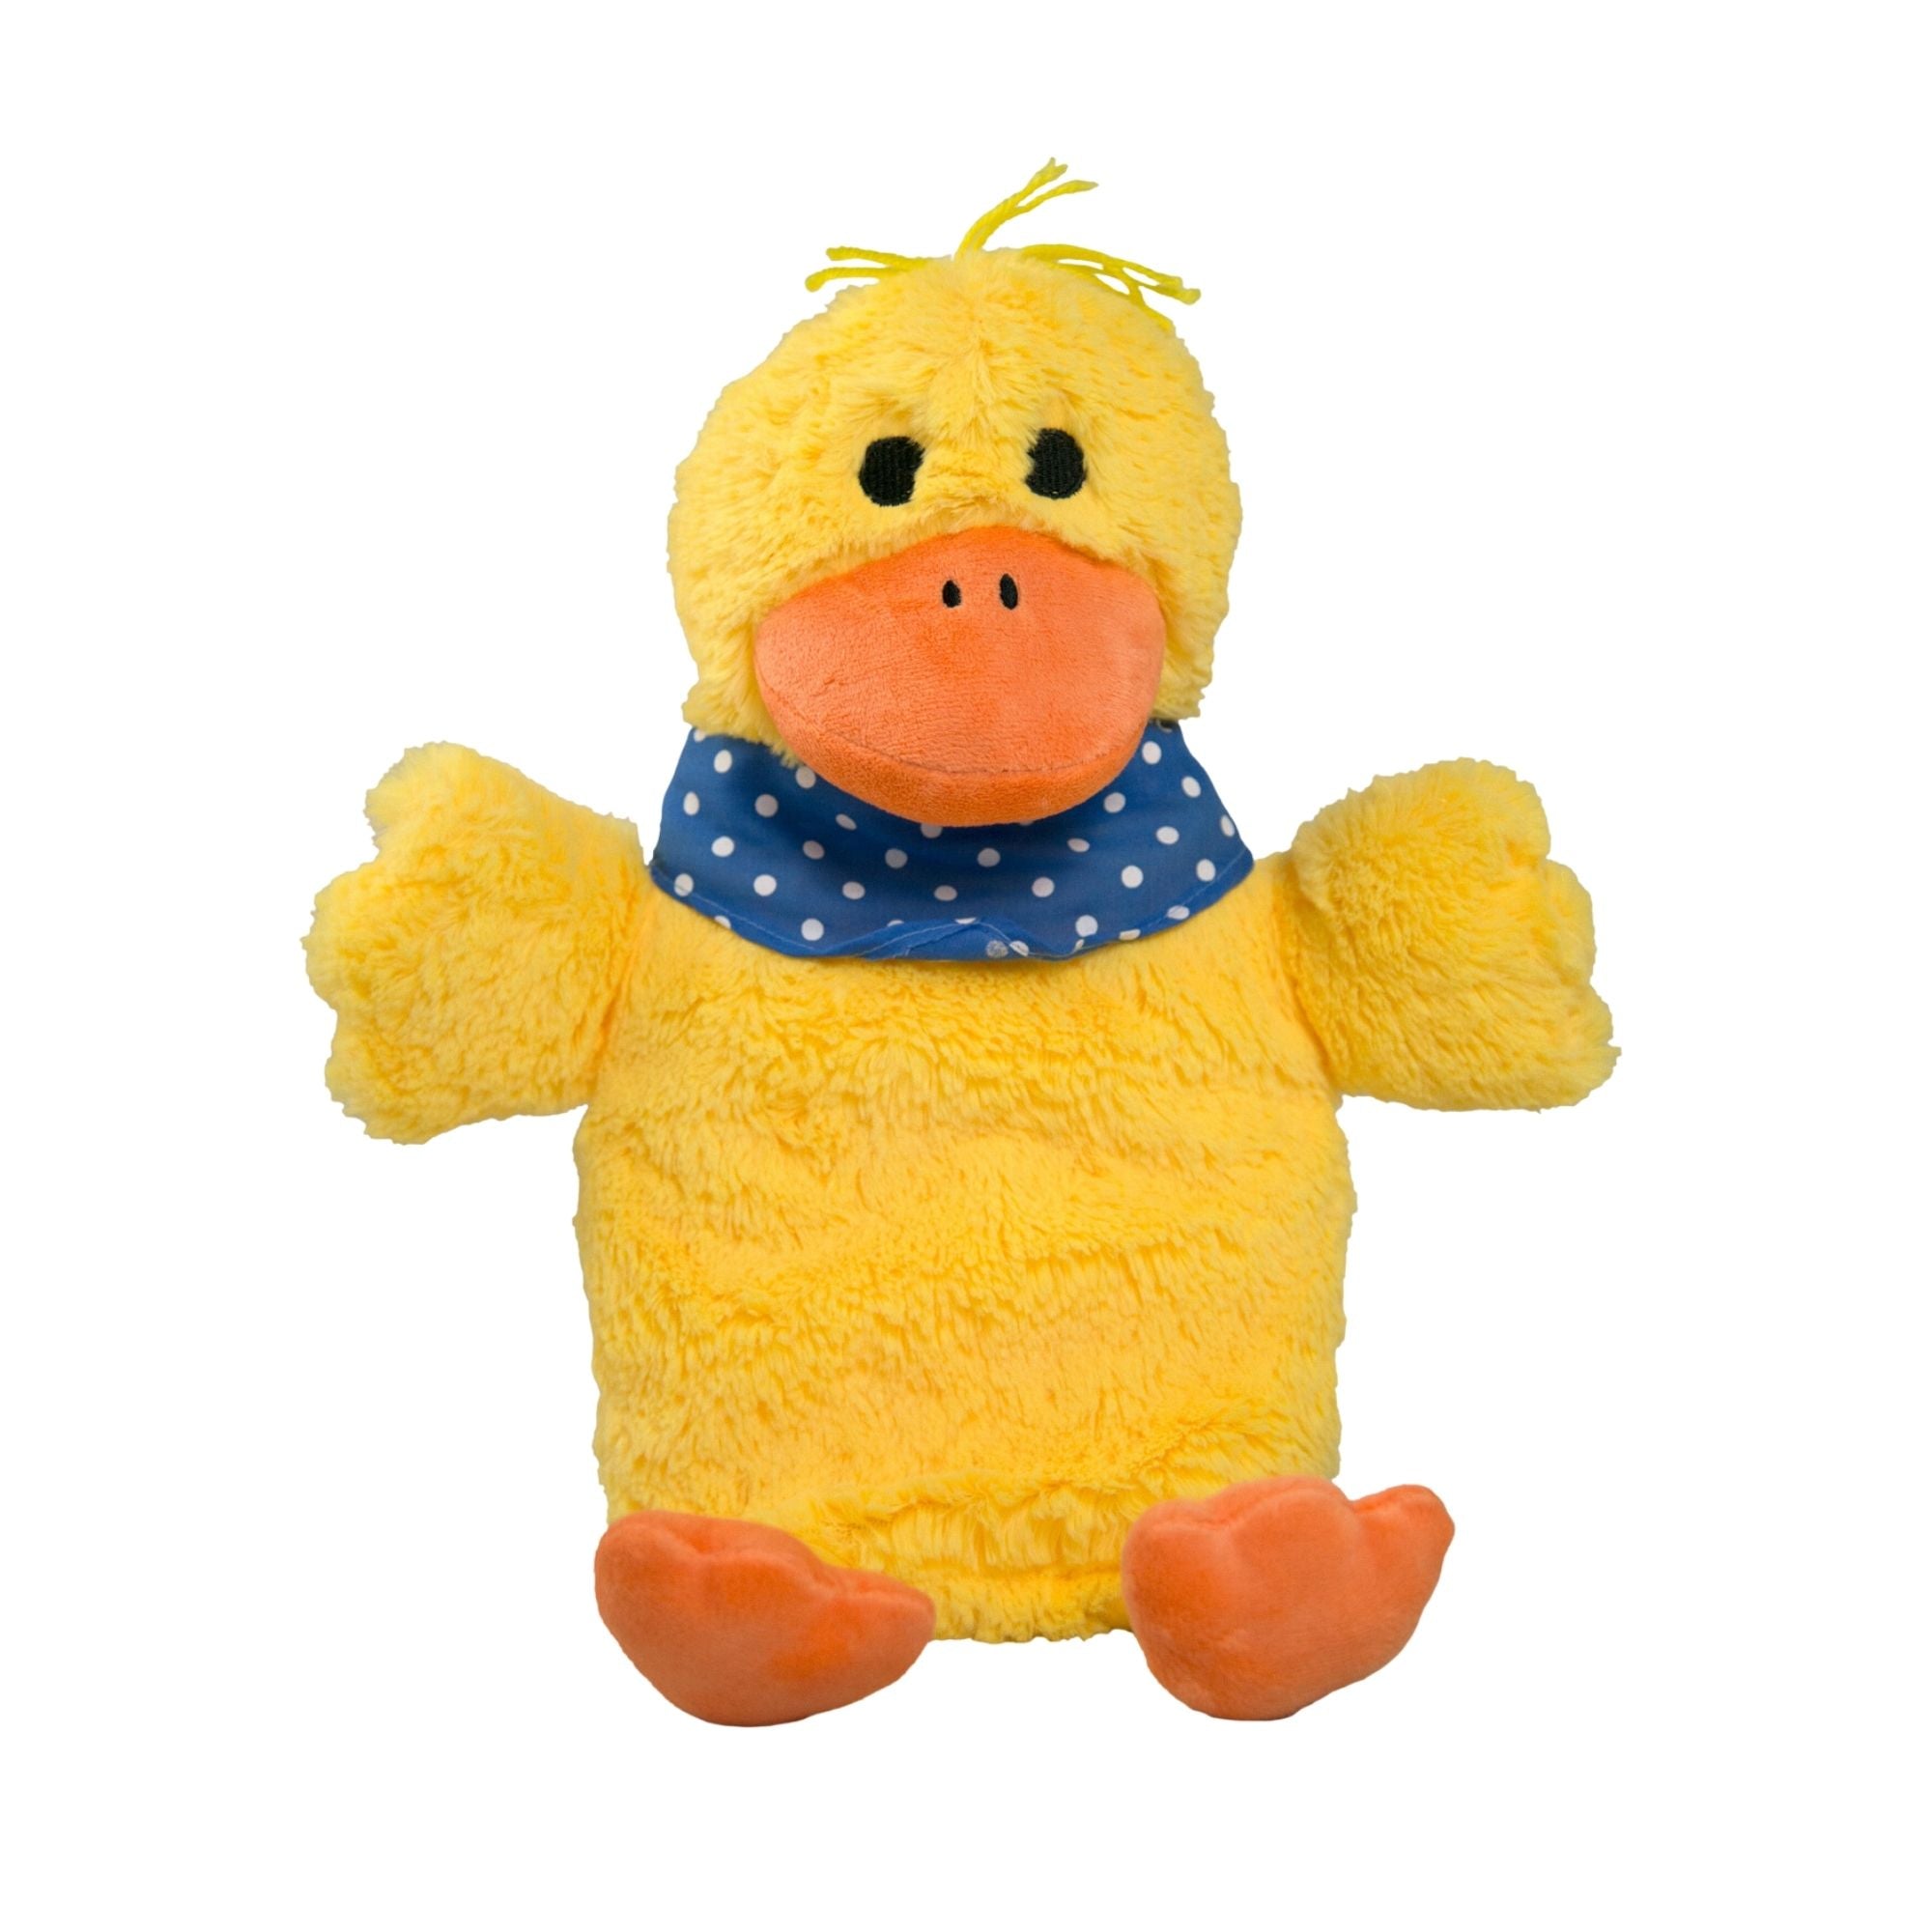 0.8 Litre Eco Hot Water Bottle with Velvety Soft Plush Duck Cover (rubberless)